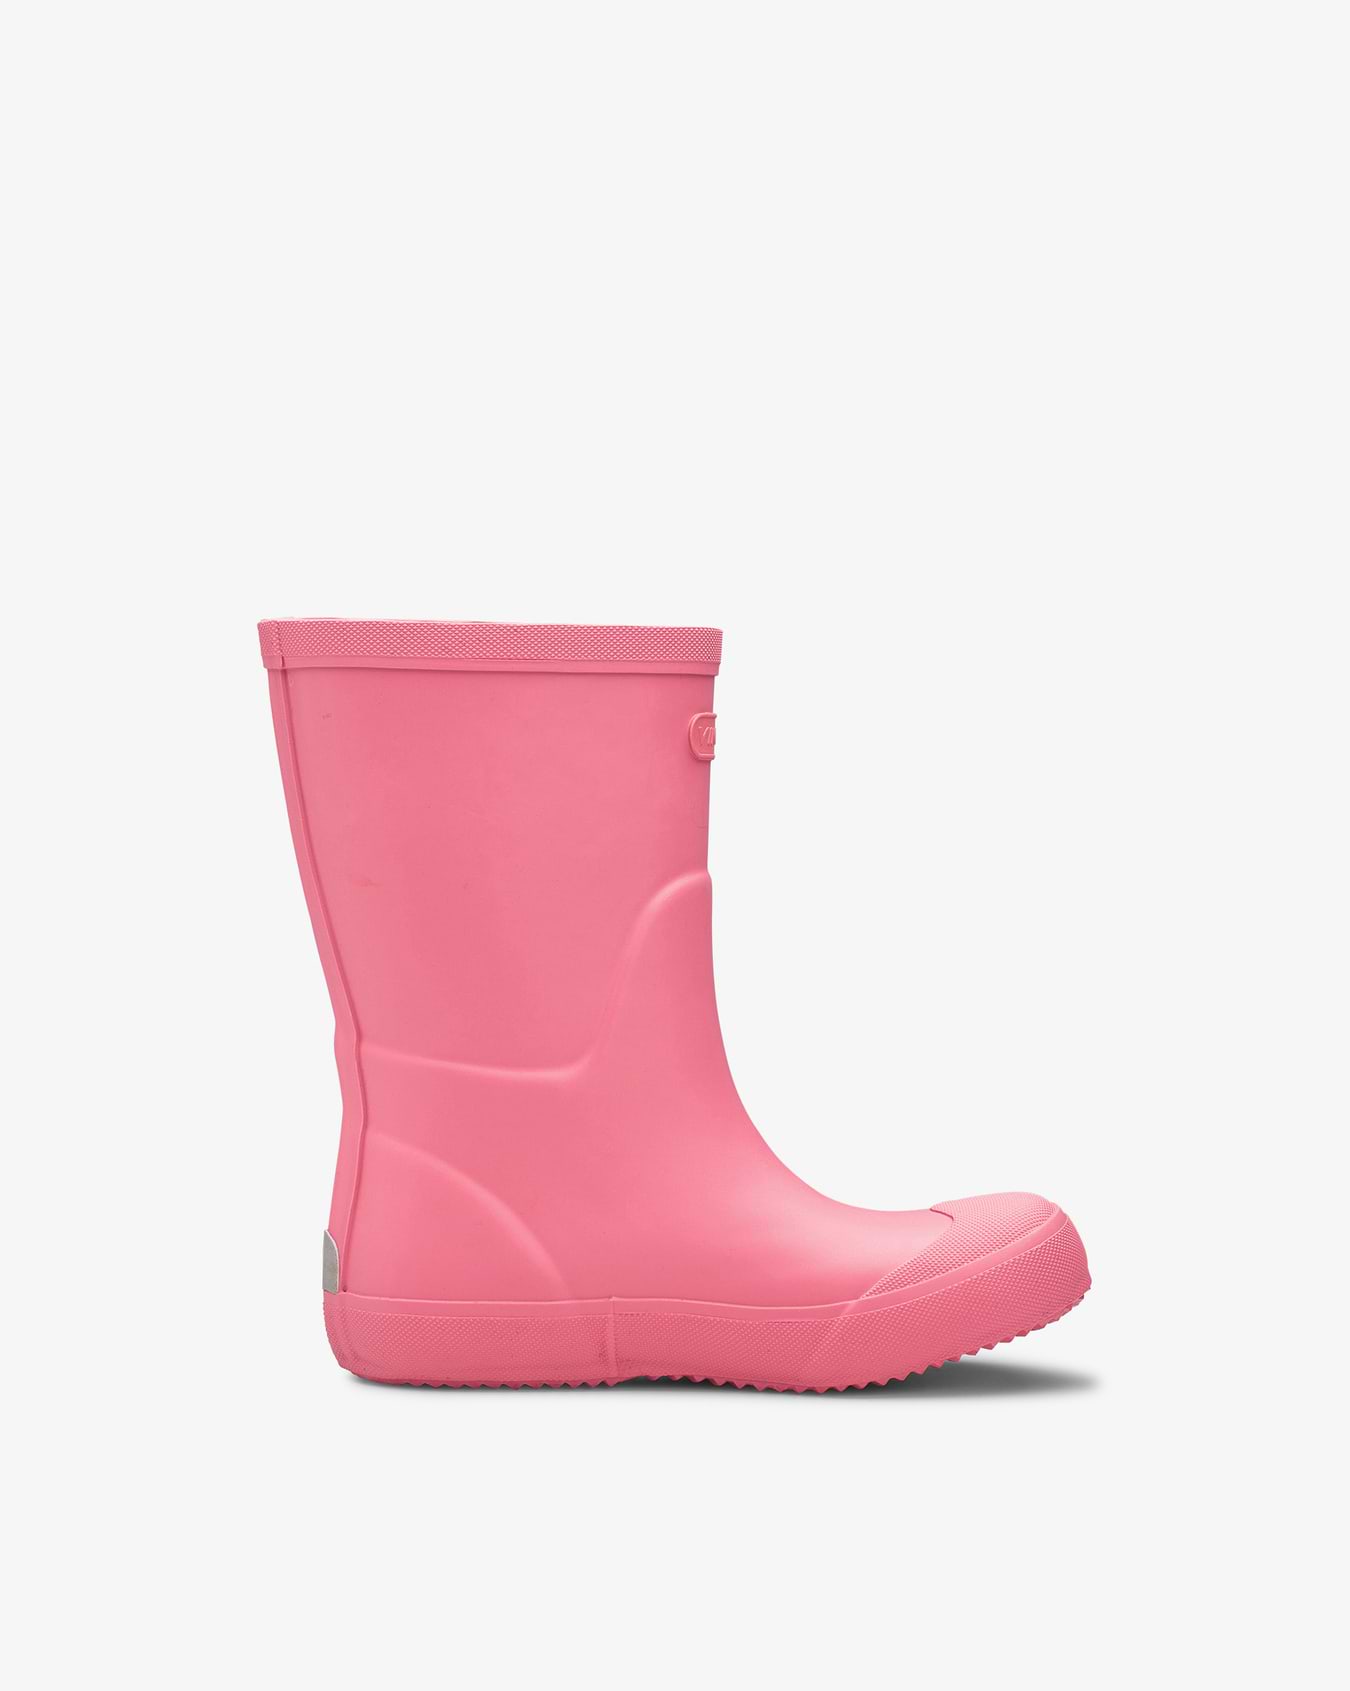 Viking Indie Active Kids Rubber Boots